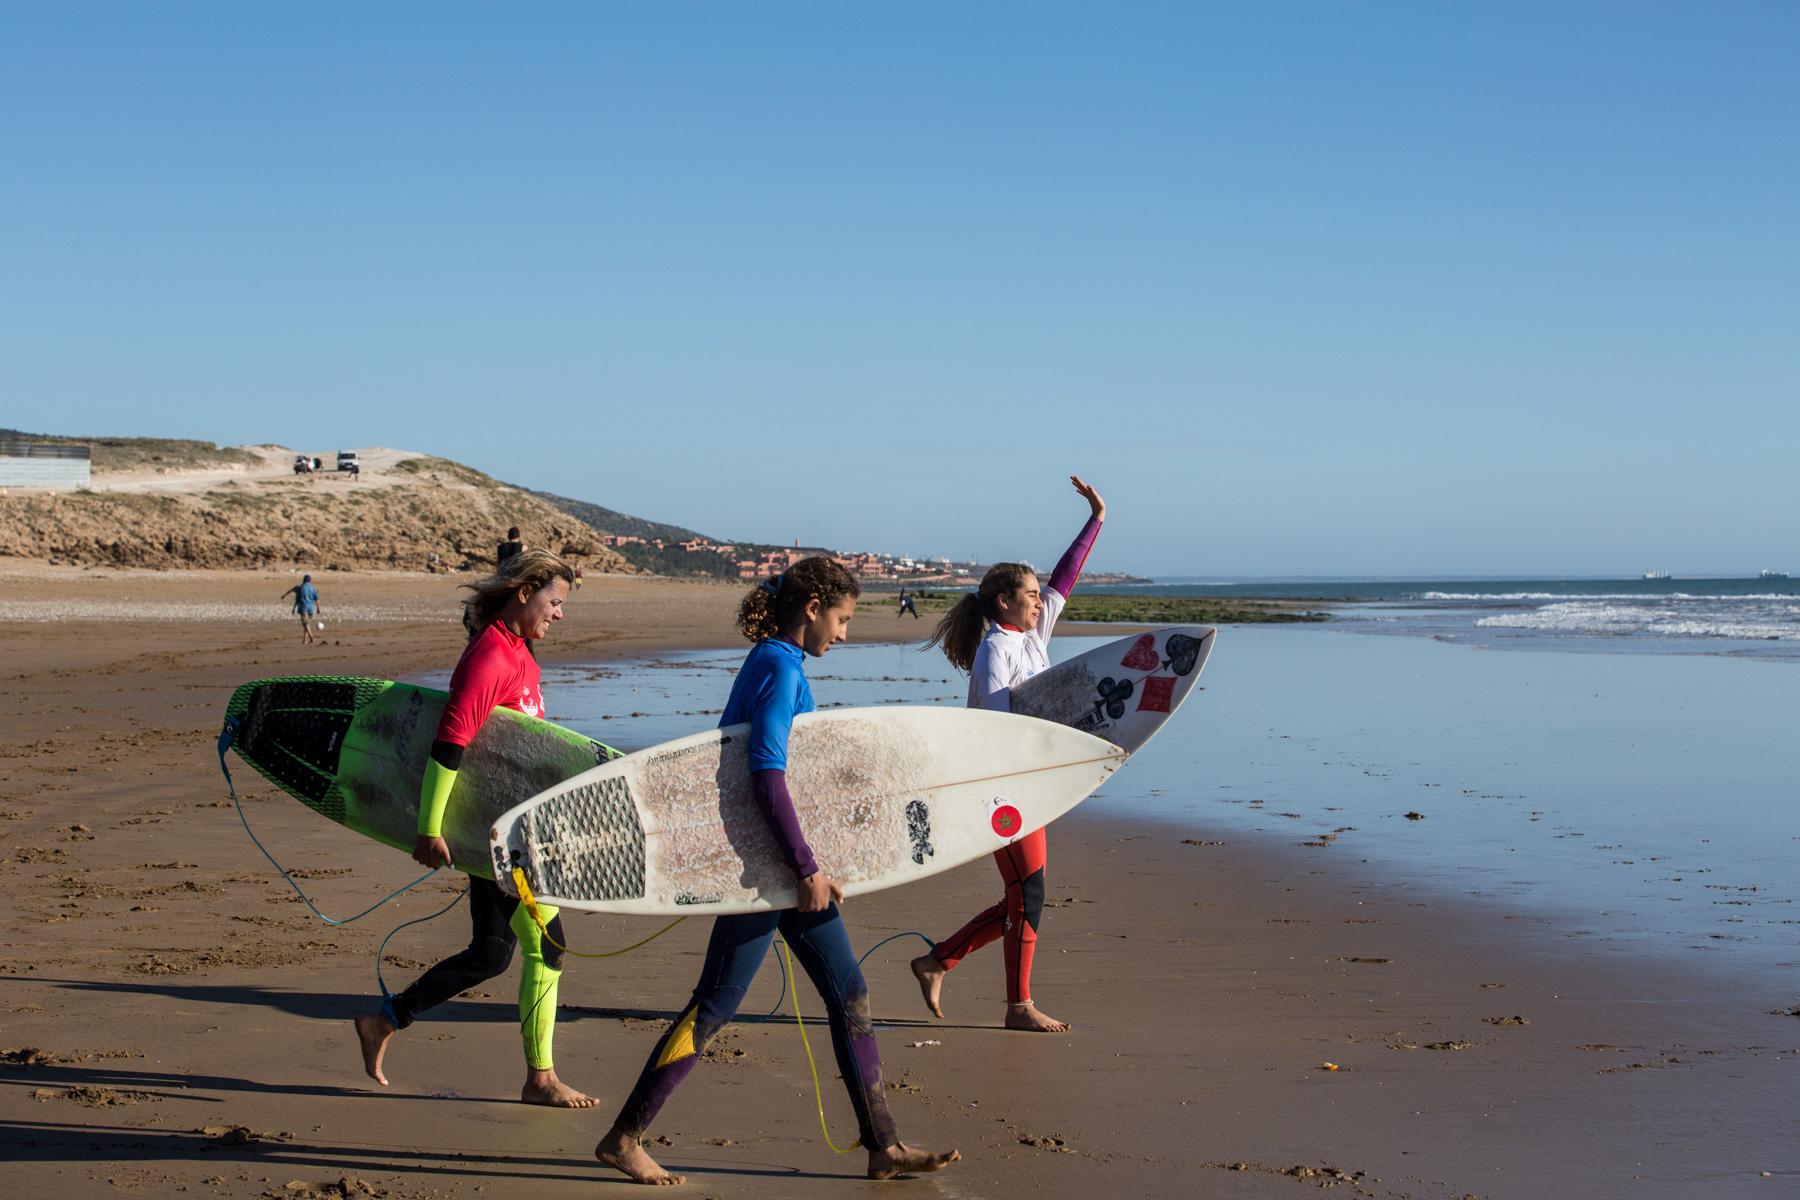 Ghita Guemmi (right), and Fatima Berrada (left), Lilias Tebbaï (center) approach the water with their surfboards.